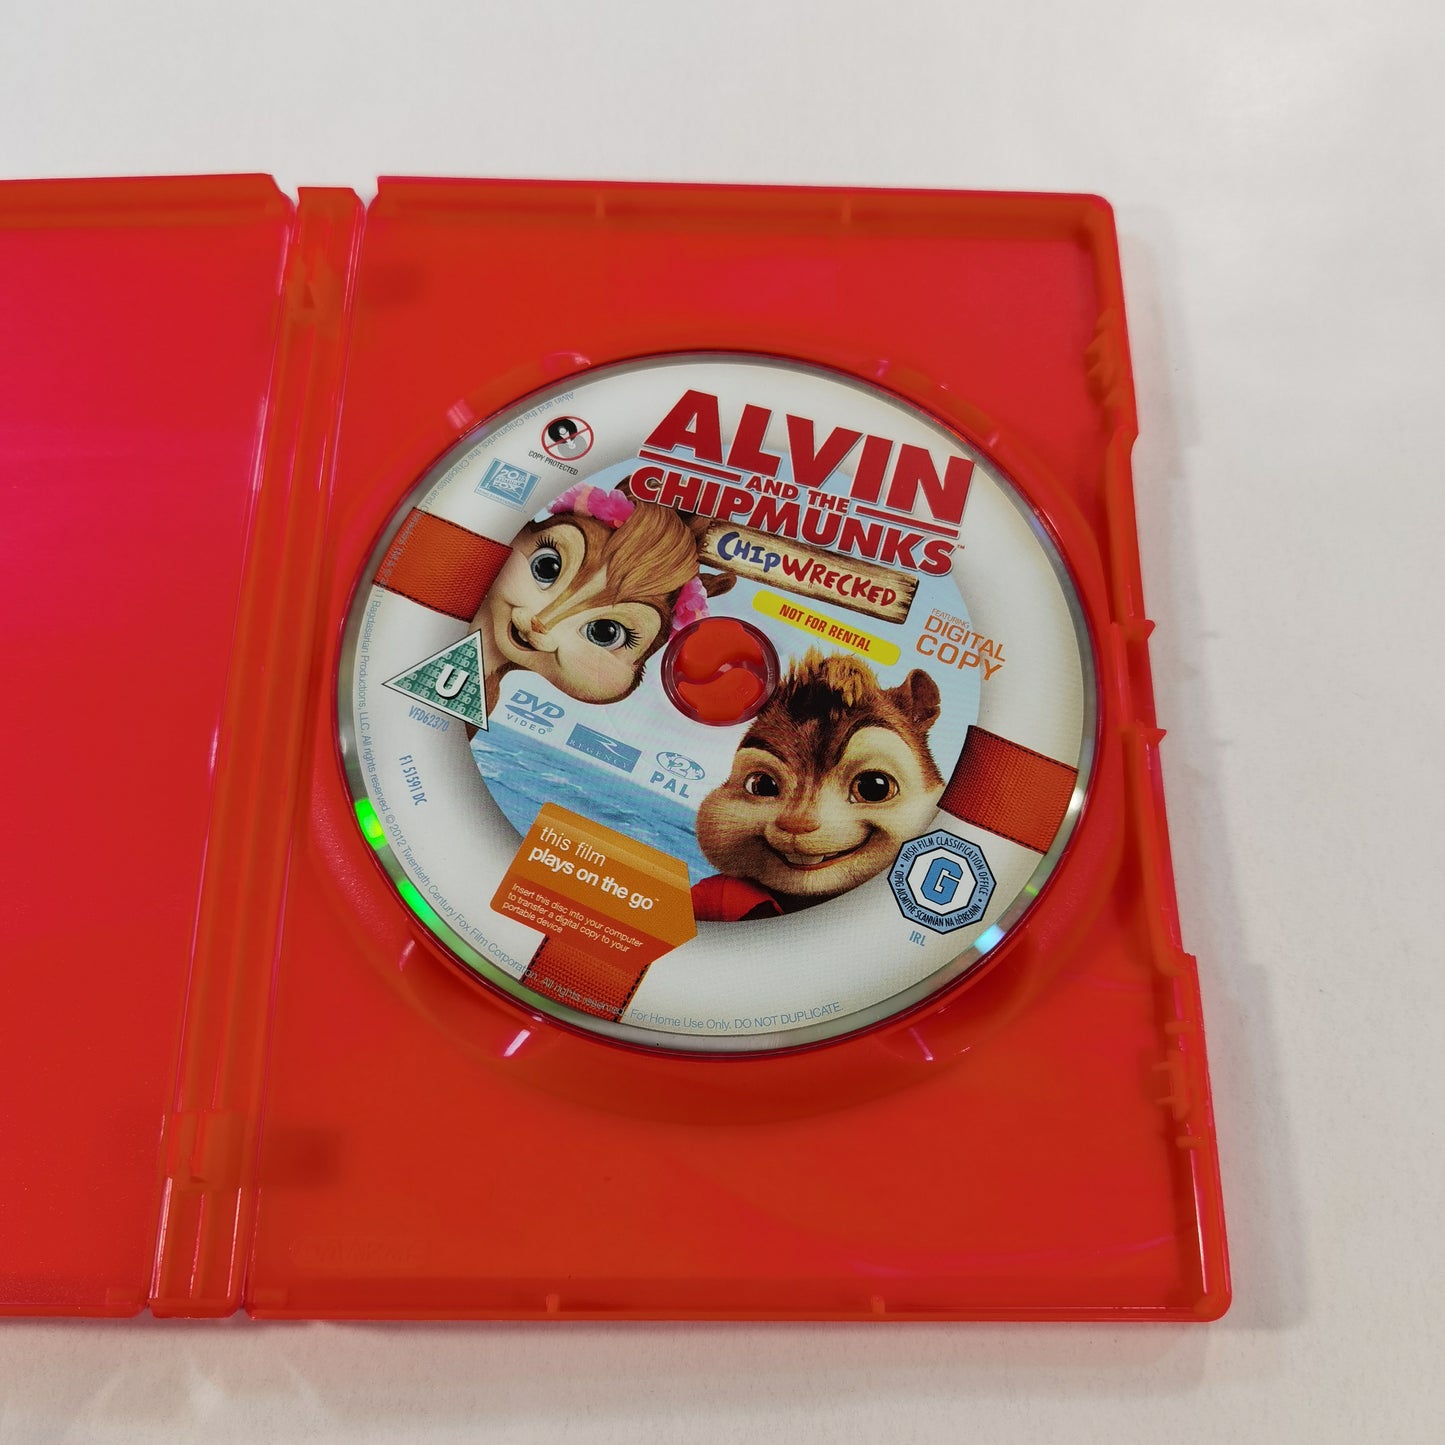 Alvin And The Chipmunks: Chipwrecked (2011) - DVD 5039036050982